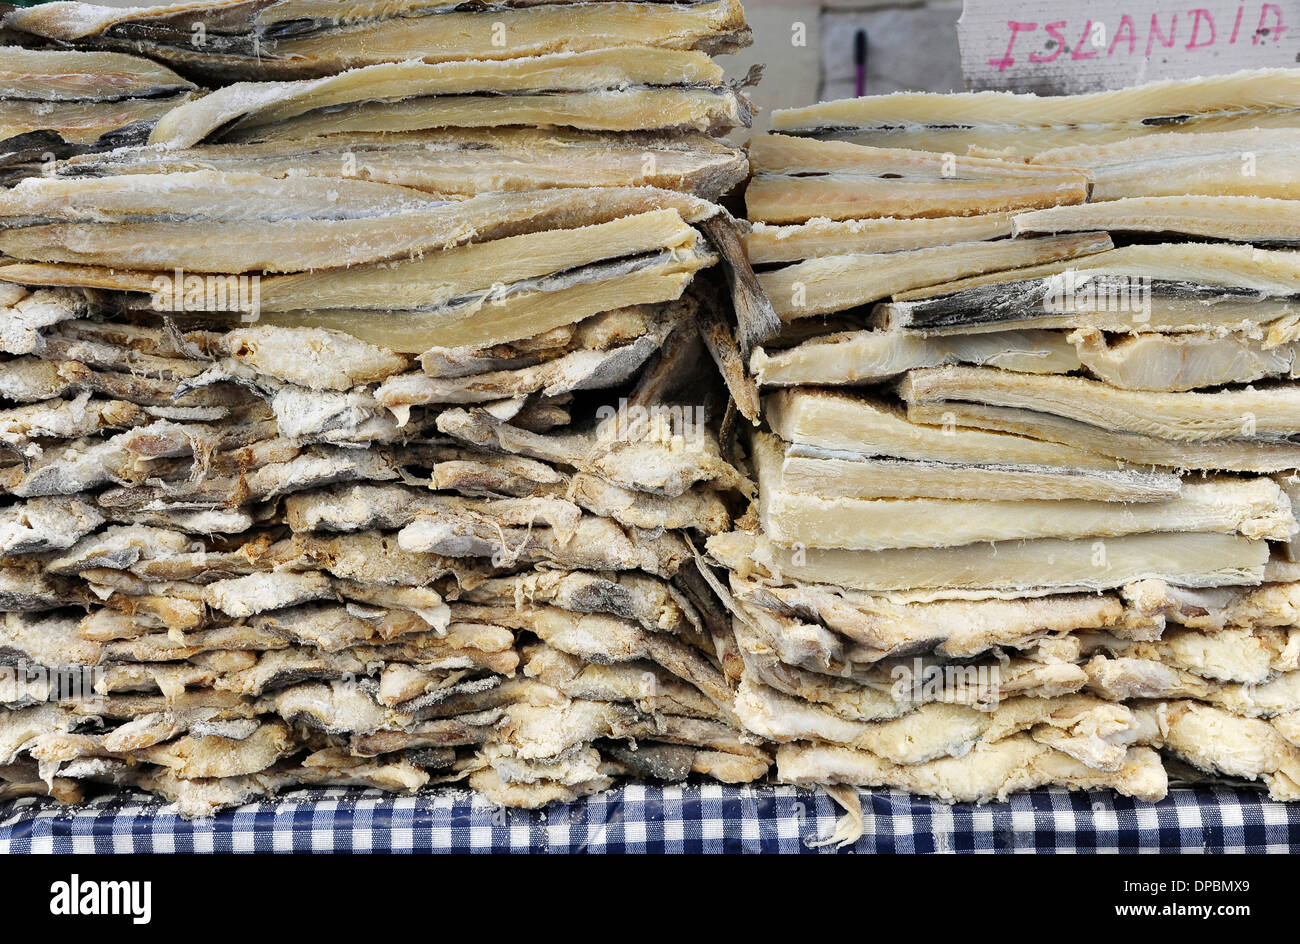 icelandic salted dried cod stacked in stand of the annual All Saints Market in Cocentaina, Alicante province, Spain Stock Photo